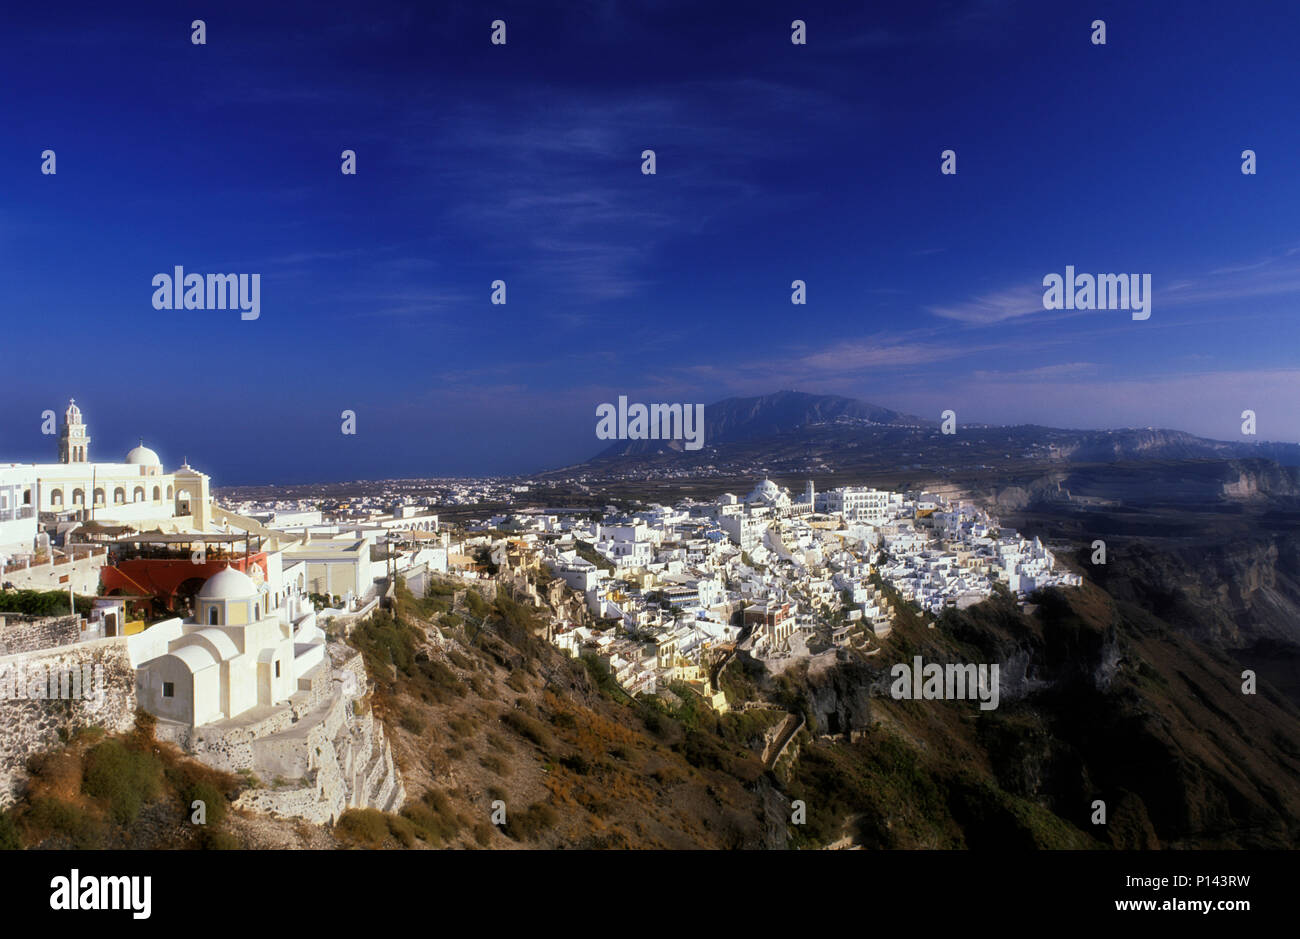 Greek Island of Thira (Santorini), view of the cliffs, looking south, showing the town of Thira along the cliff's edge with late light, Greece Stock Photo